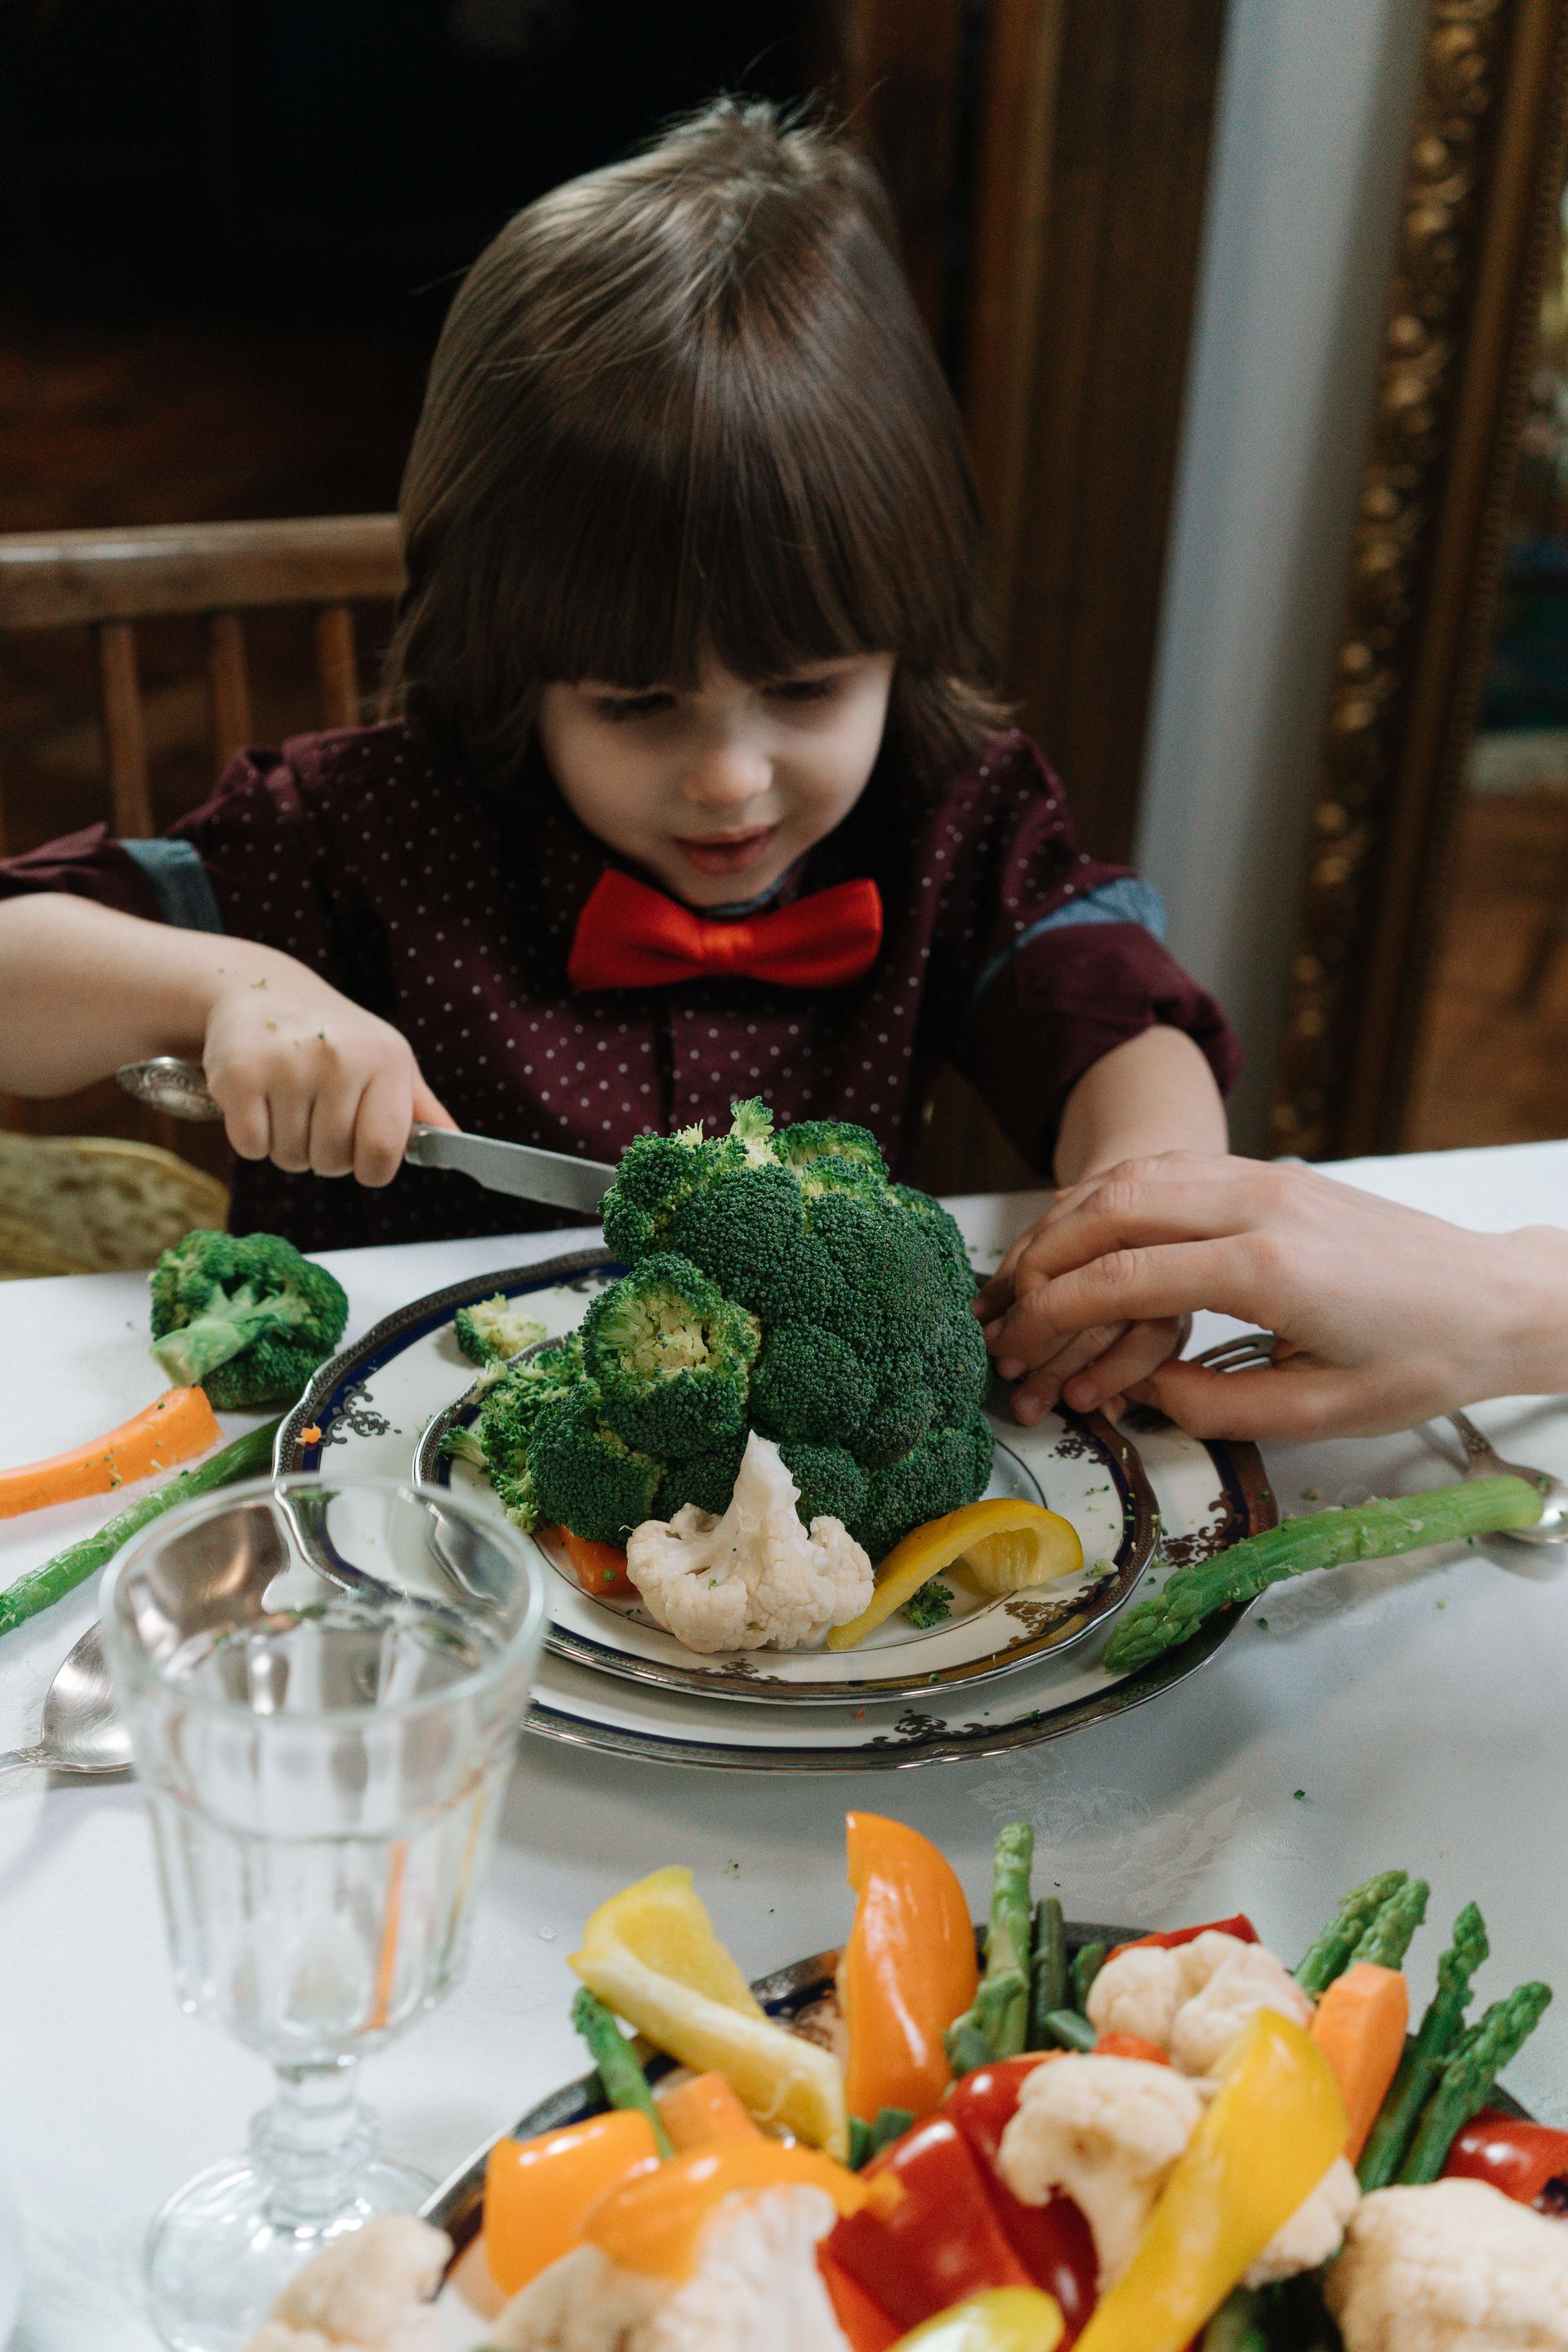 A kid cutting broccoli on a plate at a table.